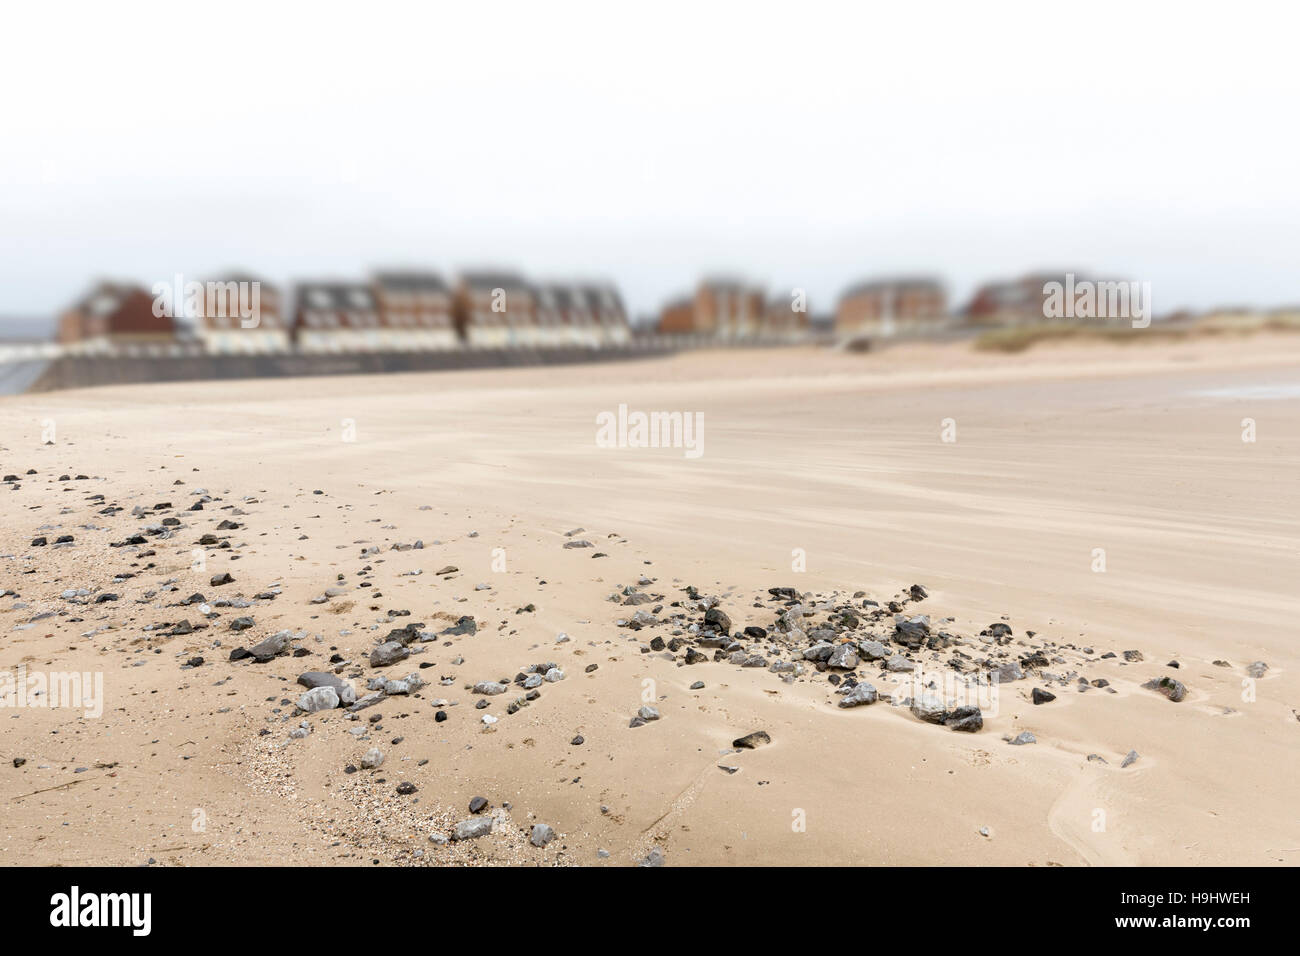 Pebbles on sandy beach with sea front houses, Aberavon, Wales, UK Stock Photo